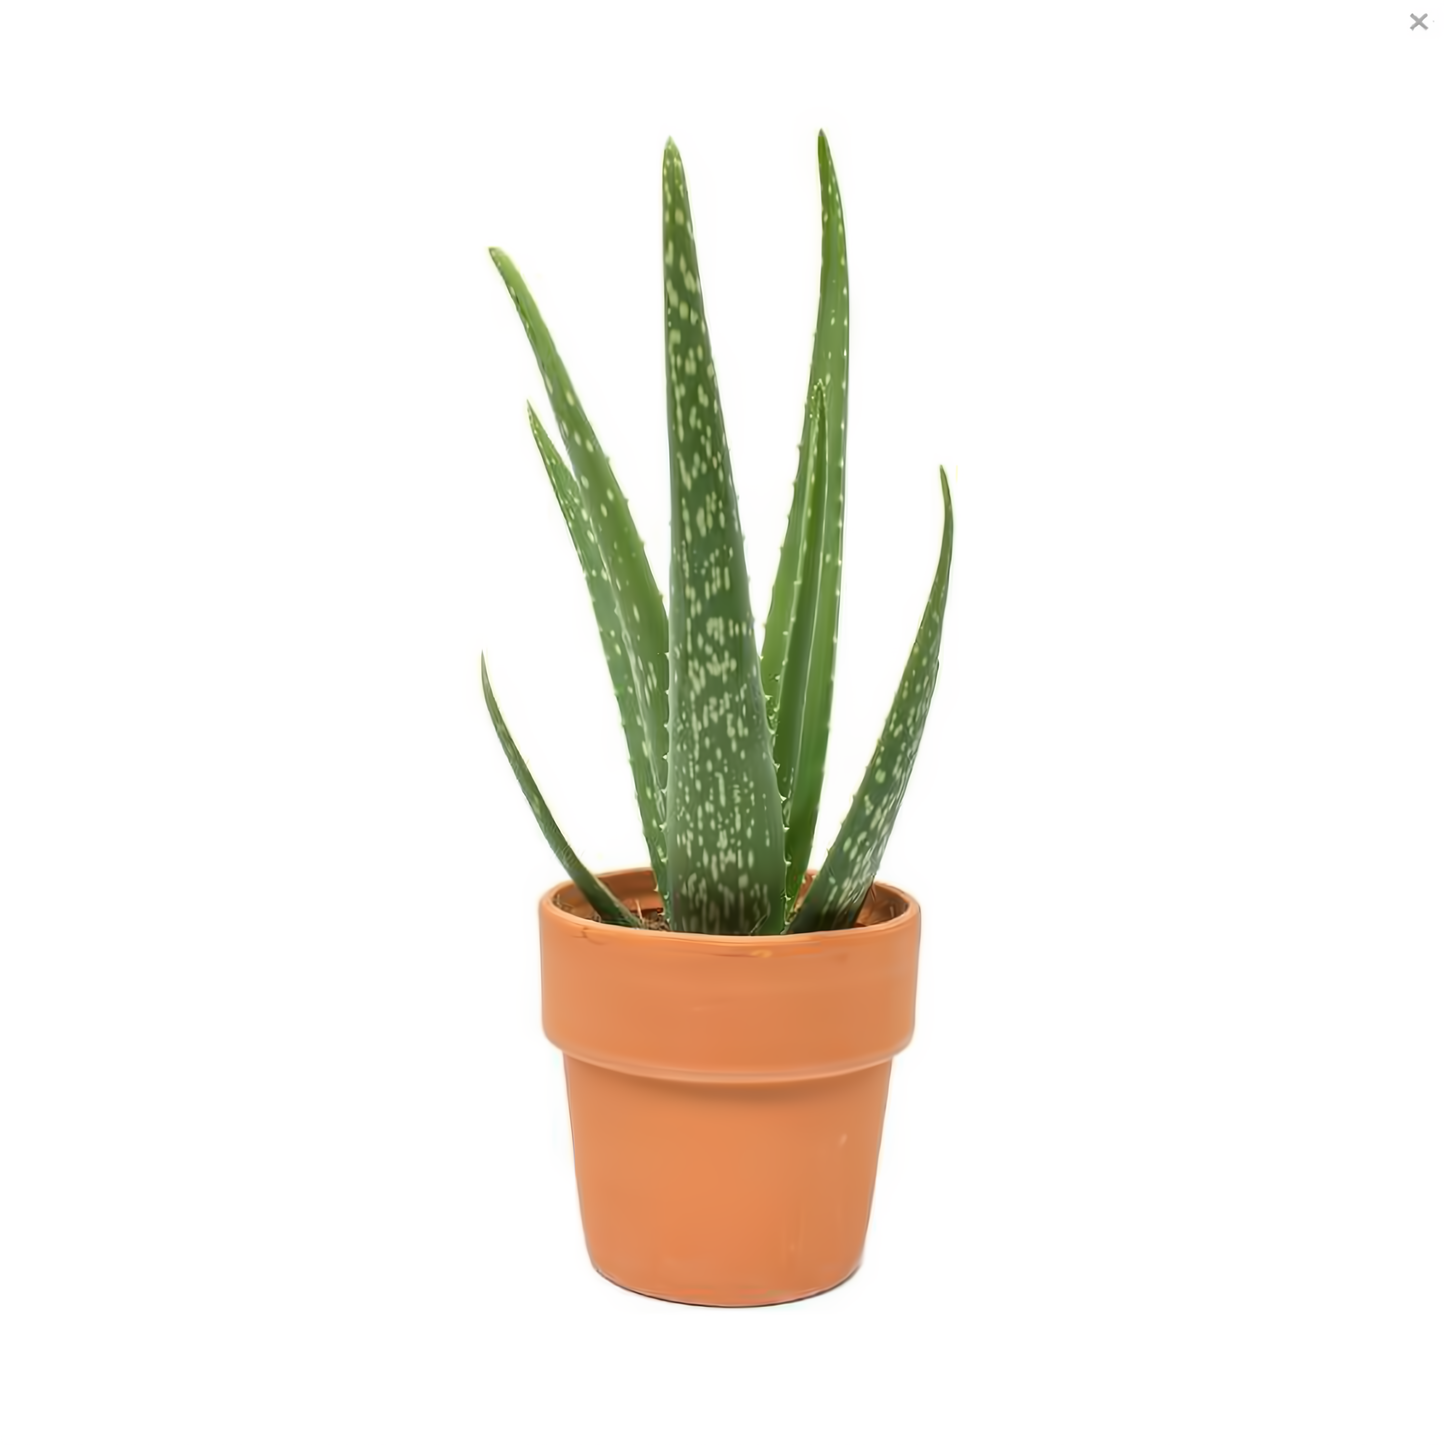 NYC Flower Delivery - Aloe Vera Plant In Clay Pot - Plants